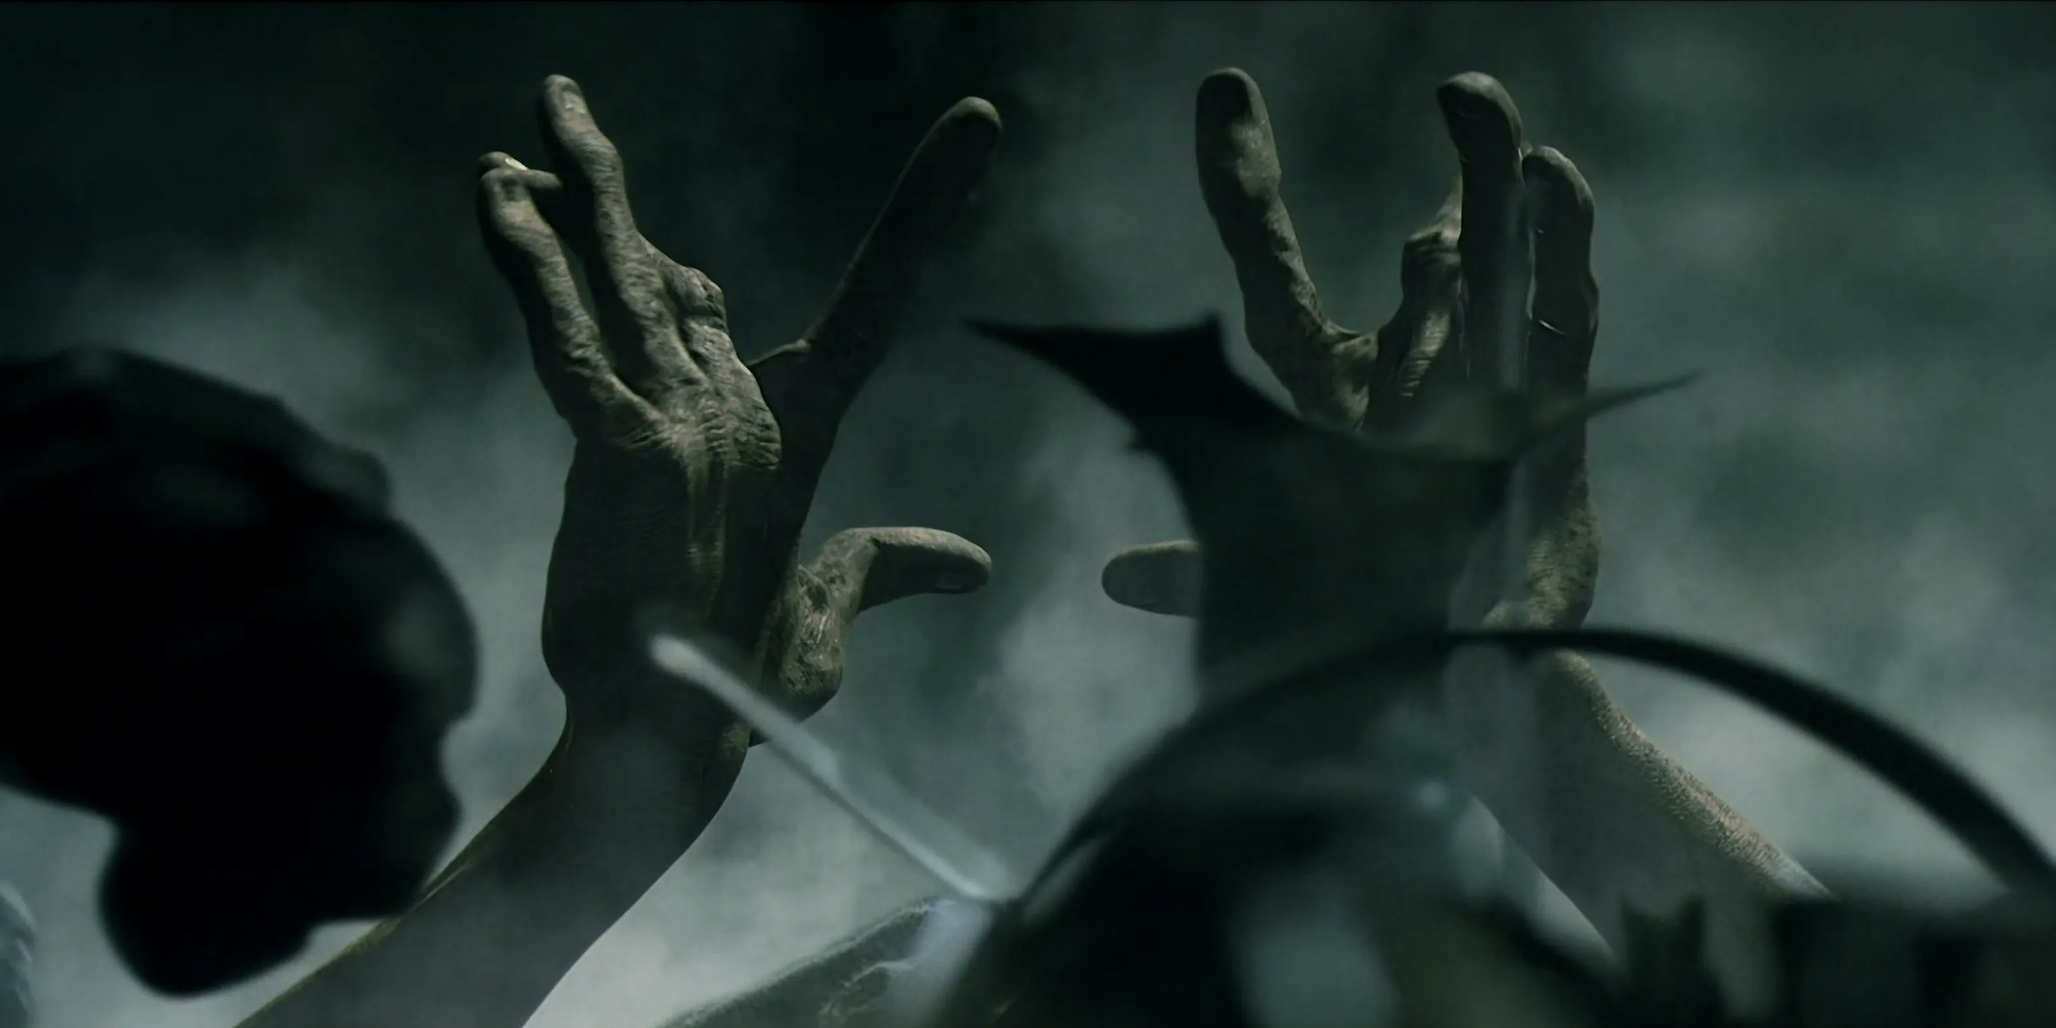 Gollum's hands in the air from LOTR